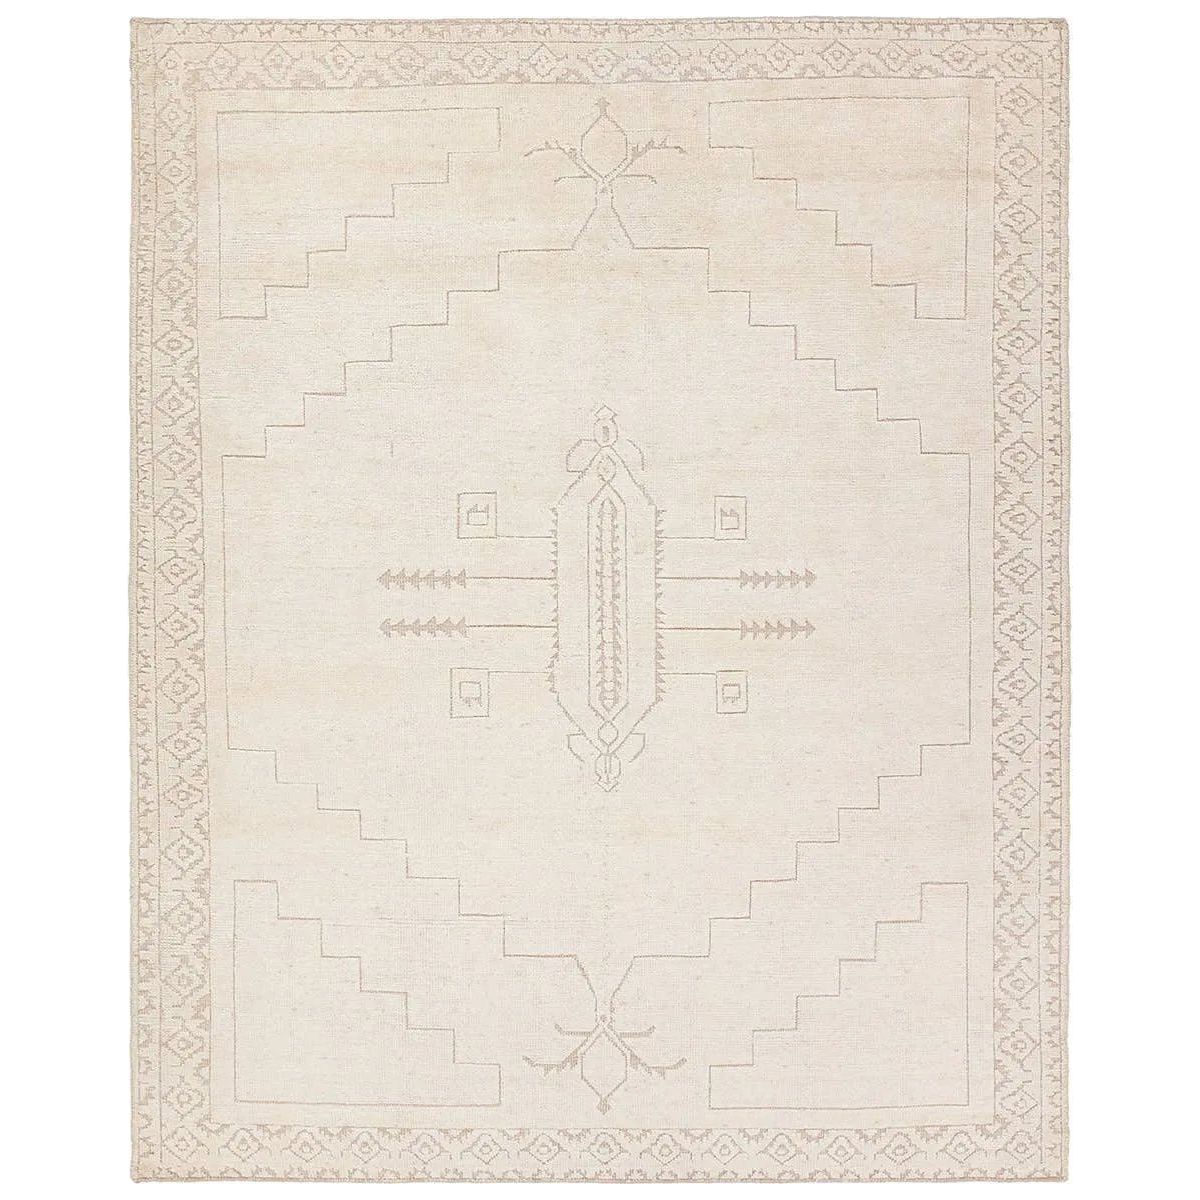 Hand carded wool, soft Tencel, and a neutral color palette define the handknotted Ashend Imbar. The Imbar rug showcases a Moroccan-inspired center medallion in a neutral, cream, taupe, and beige colorway. Geometric detailing via high and low pile establishes a thin border and provides a nod to the tribal styles of northern Africa. Amethyst Home provides interior design, new home construction design consulting, vintage area rugs, and lighting in the Houston metro area.